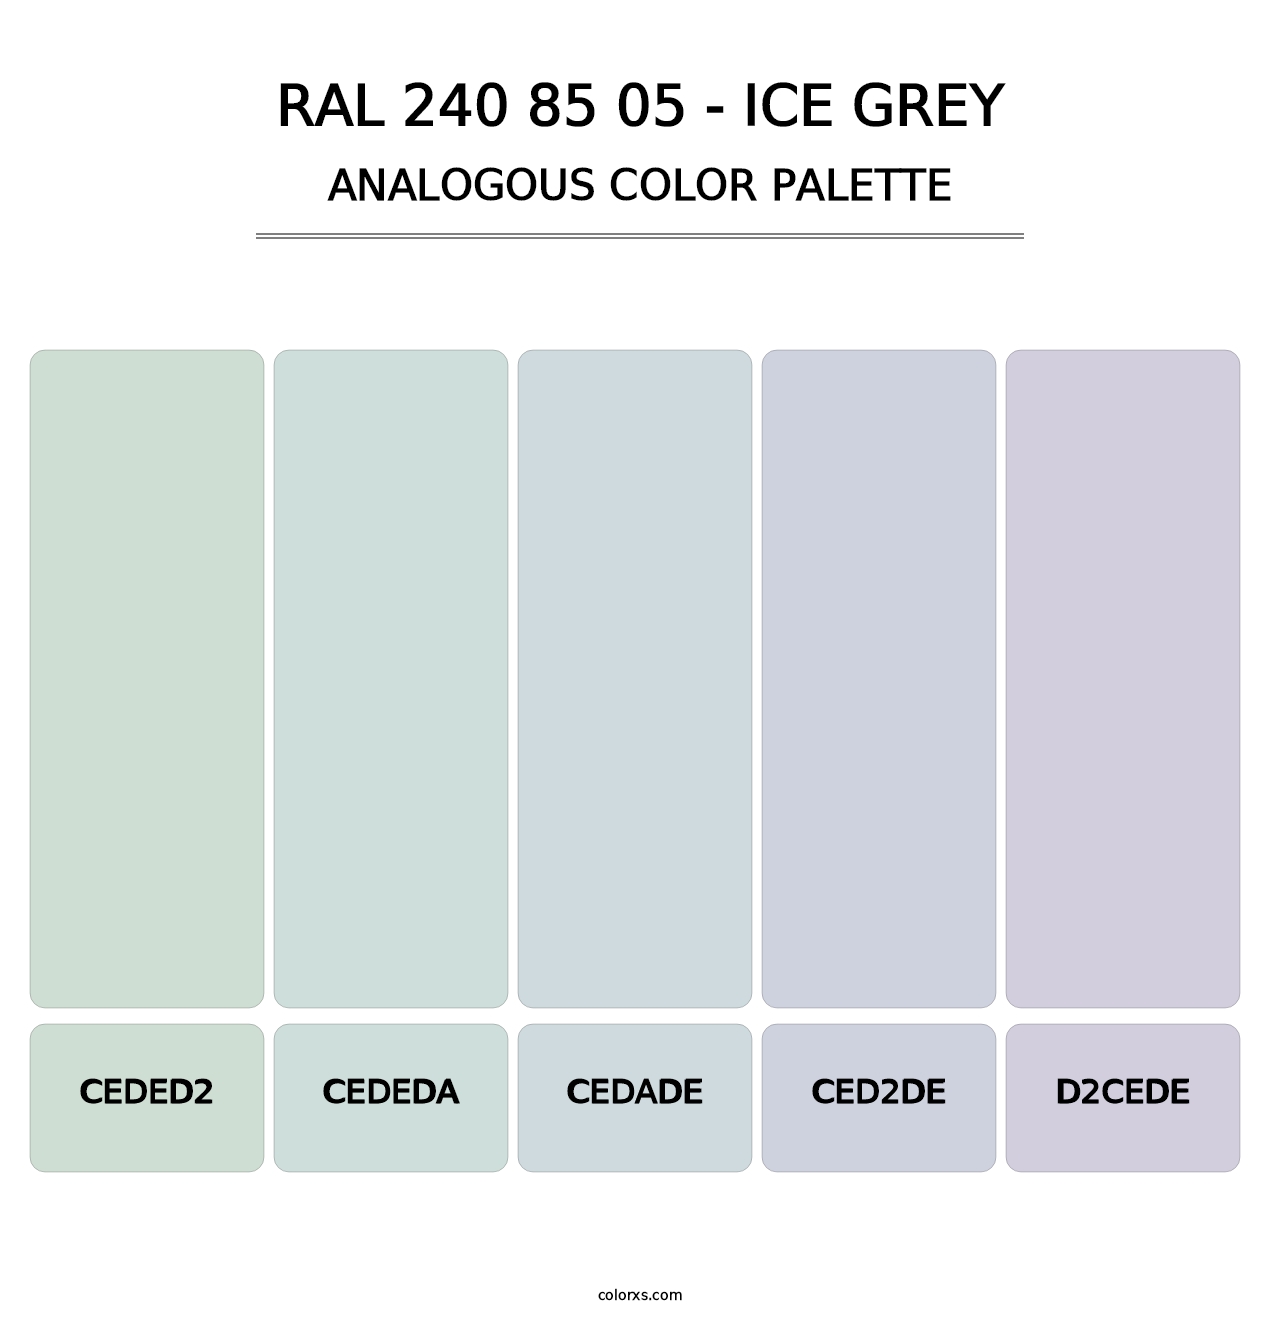 RAL 240 85 05 - Ice Grey - Analogous Color Palette